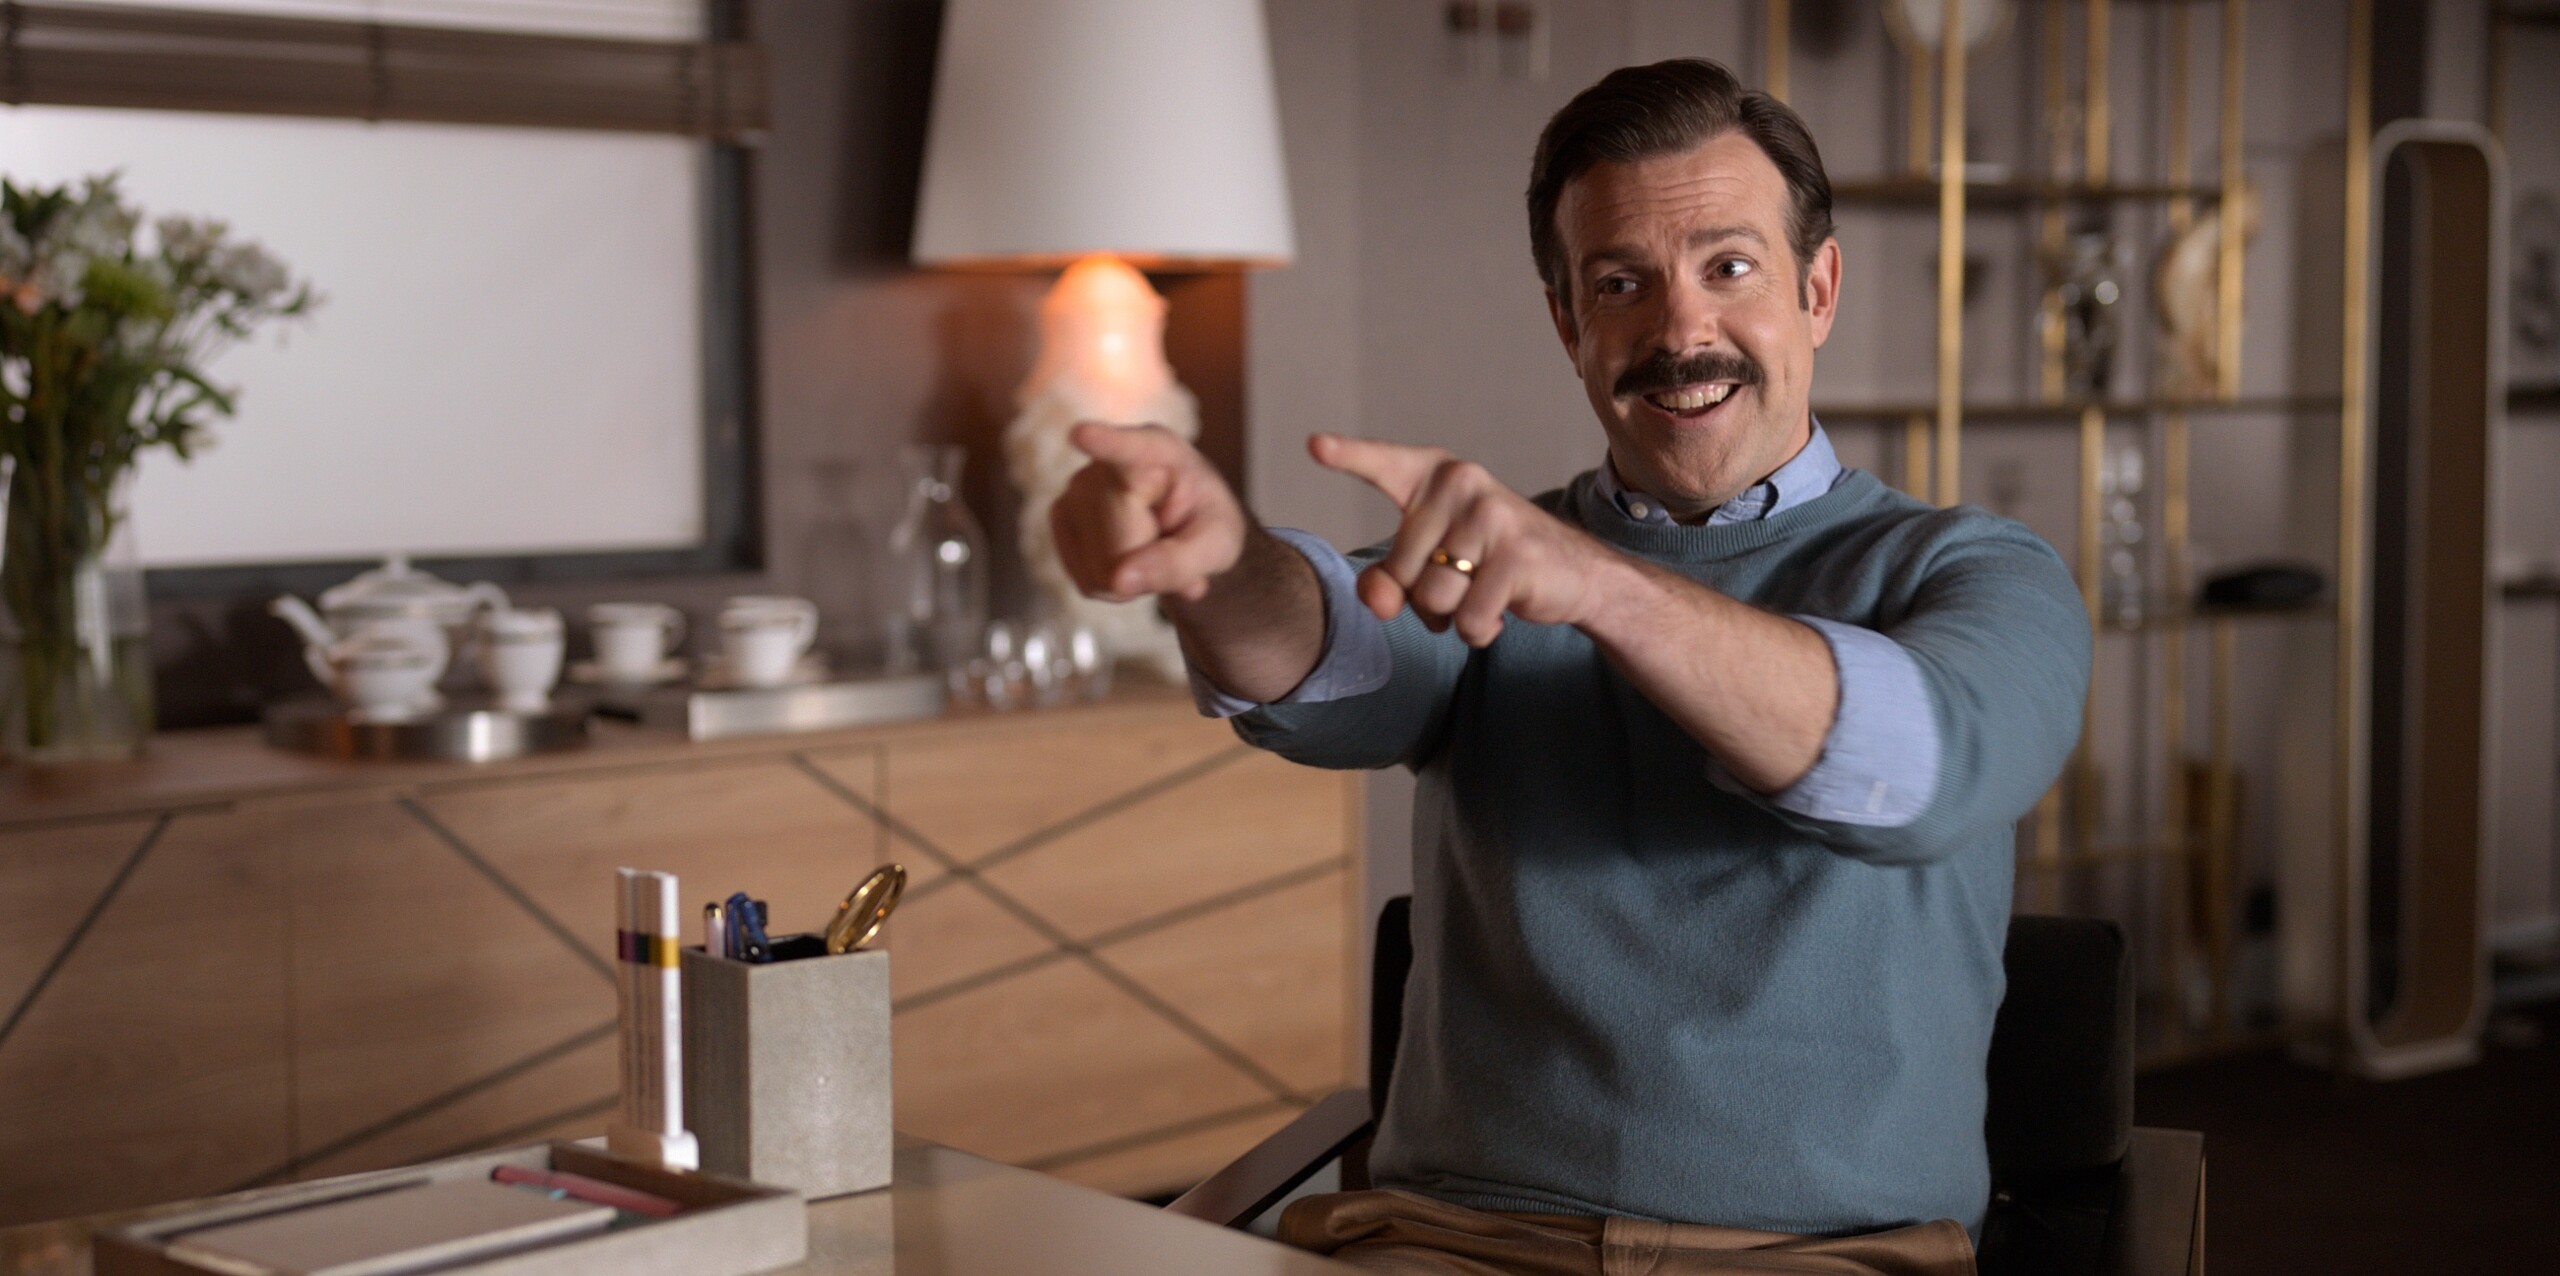 Ted Lasso magic, Unconventional coach, Hilarious moments, Refreshing comedy, 2560x1280 Dual Screen Desktop